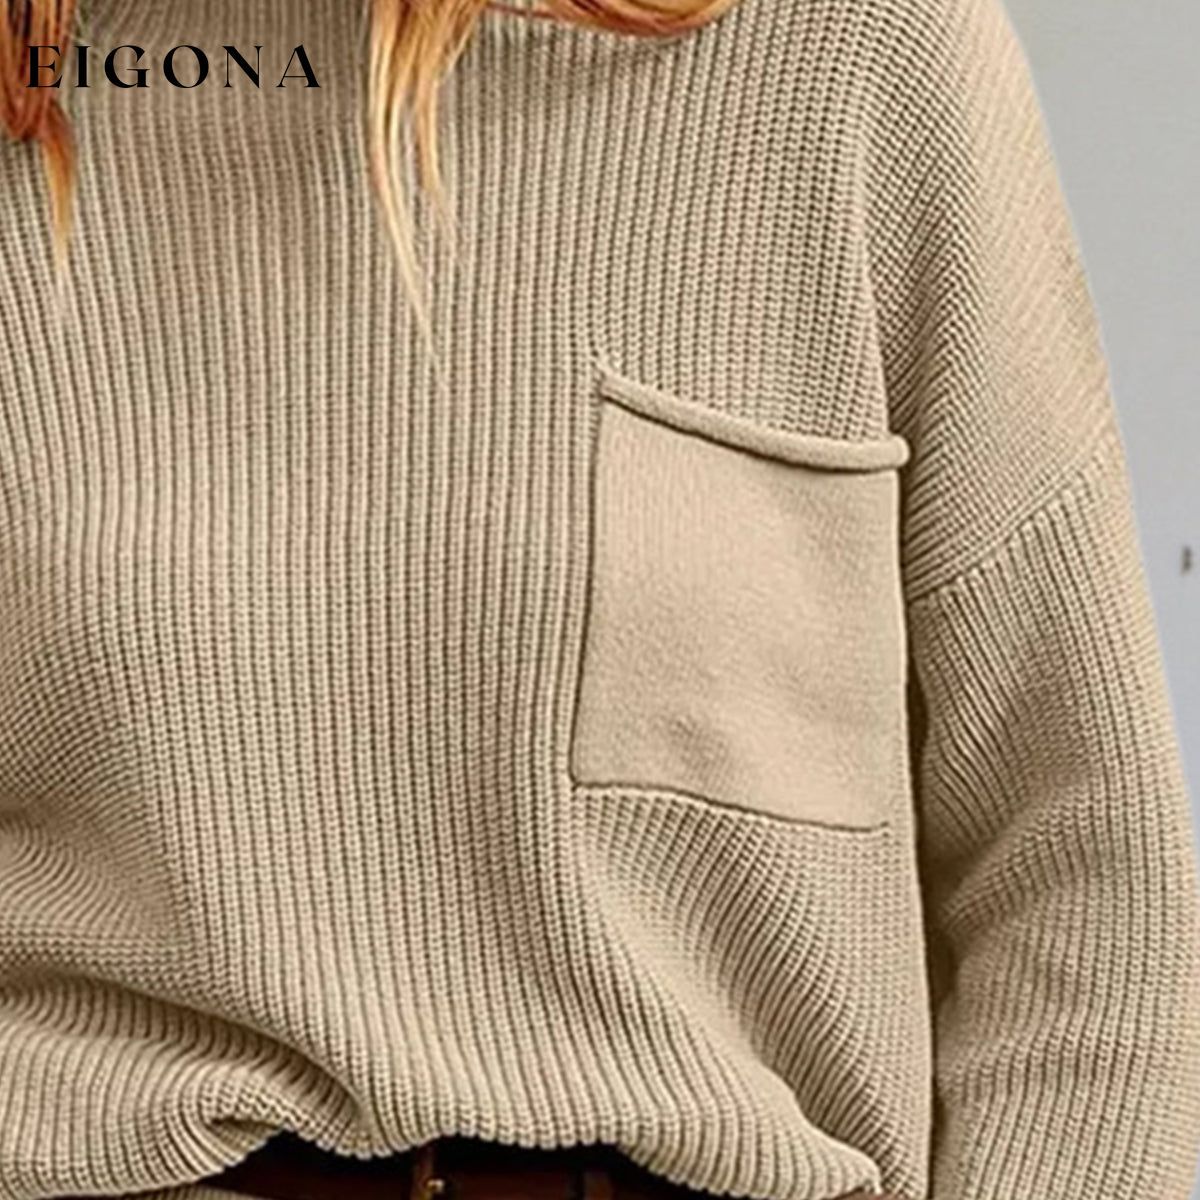 Rib-Knit Dropped Shoulder Sweater clothes G.JI Ship From Overseas Shipping Delay 09/29/2023 - 10/04/2023 Sweater sweaters